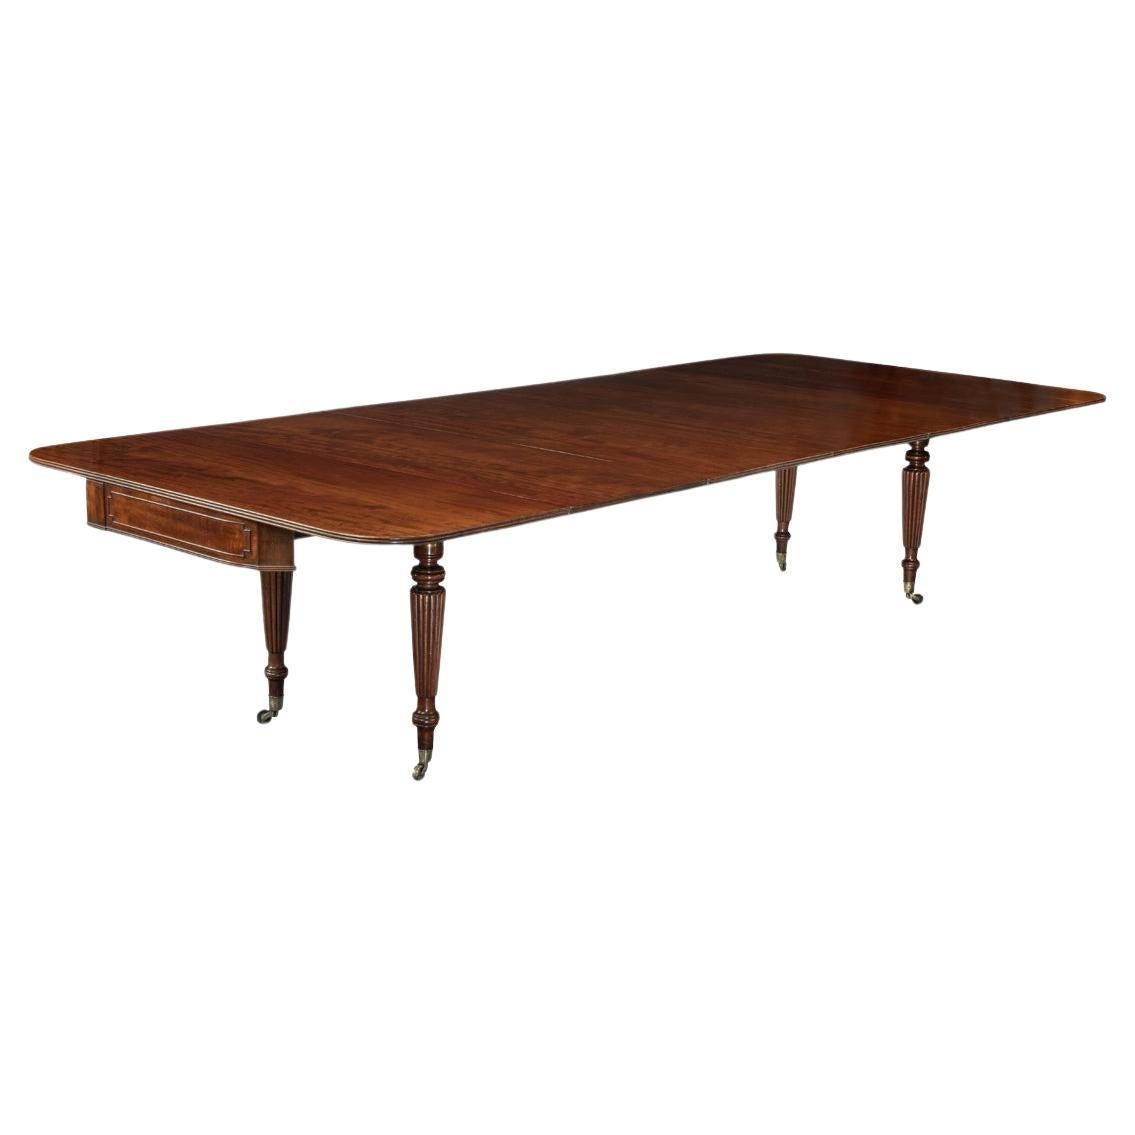 A George IV campaign dining table by Charles Stewart with five additional leaves